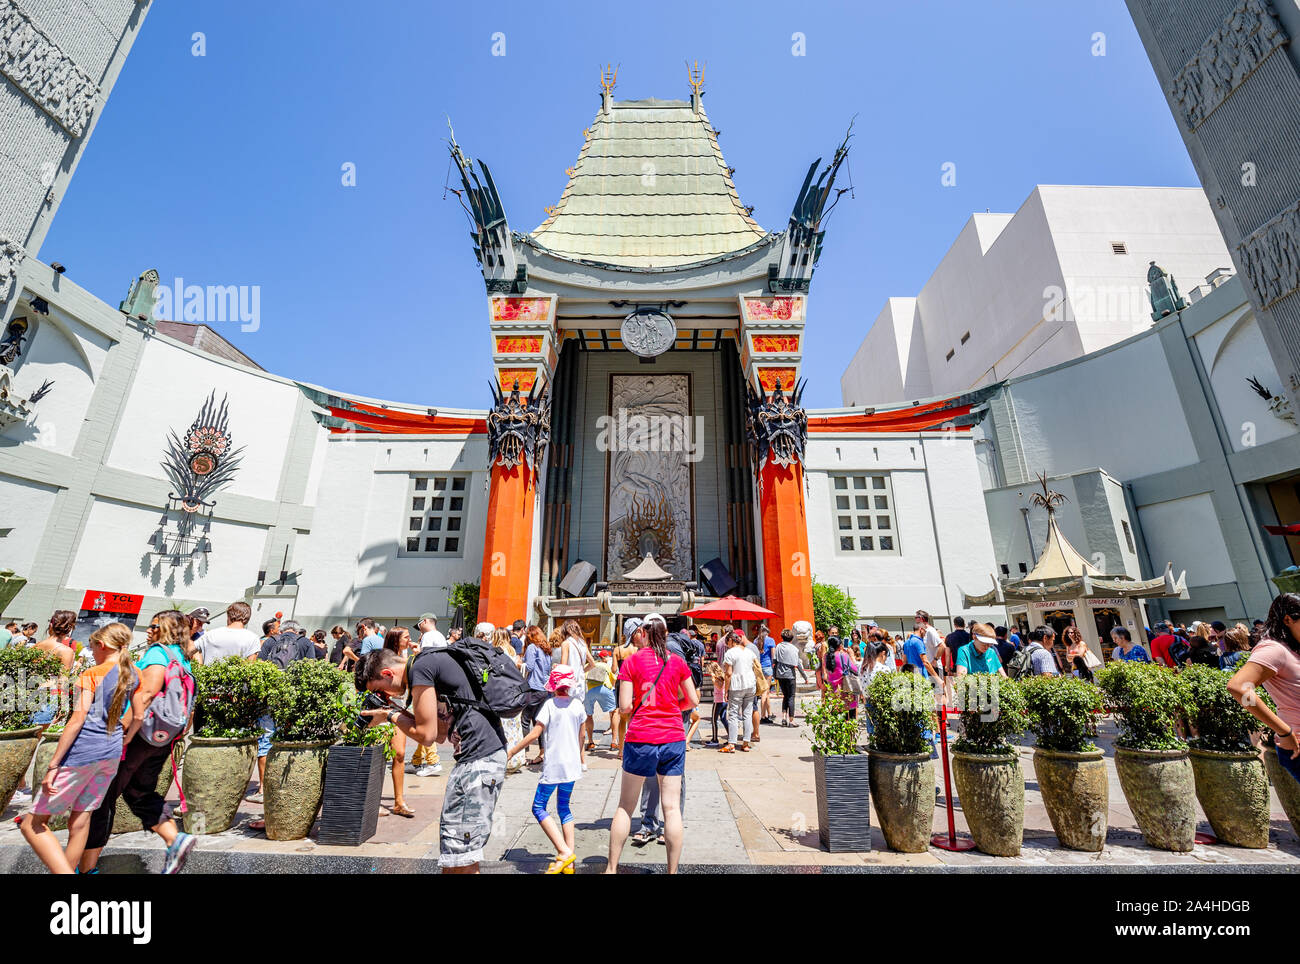 TCL Chinese Theatre in Hollywood, California.  Originally called Grauman's Chinese Theatre, known for its famous celebrity footprints. Stock Photo